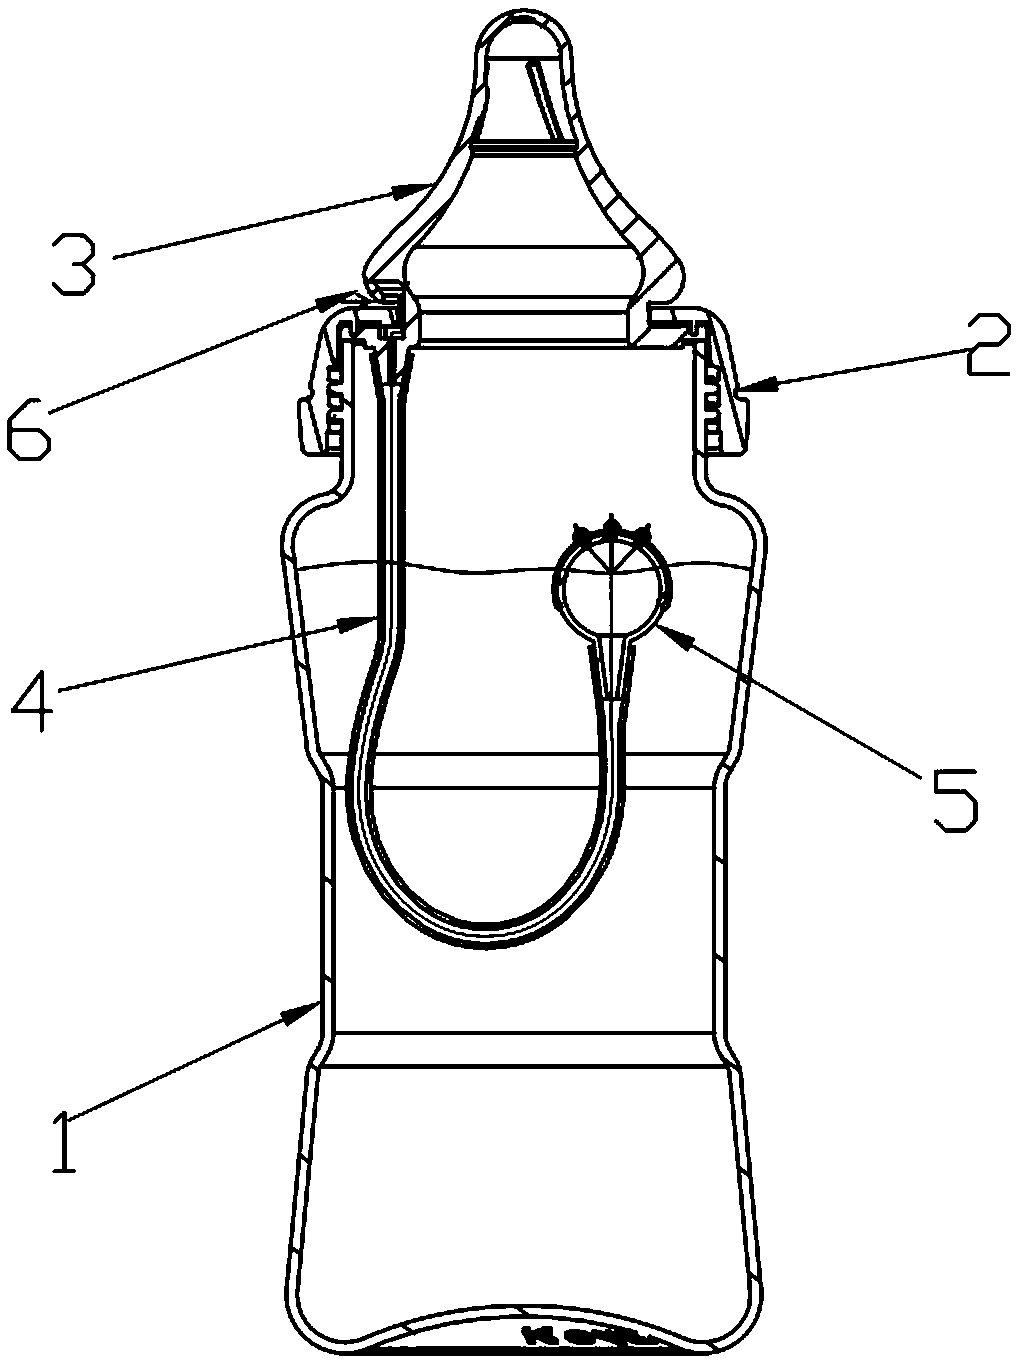 Drinking bottle with ventilation structure